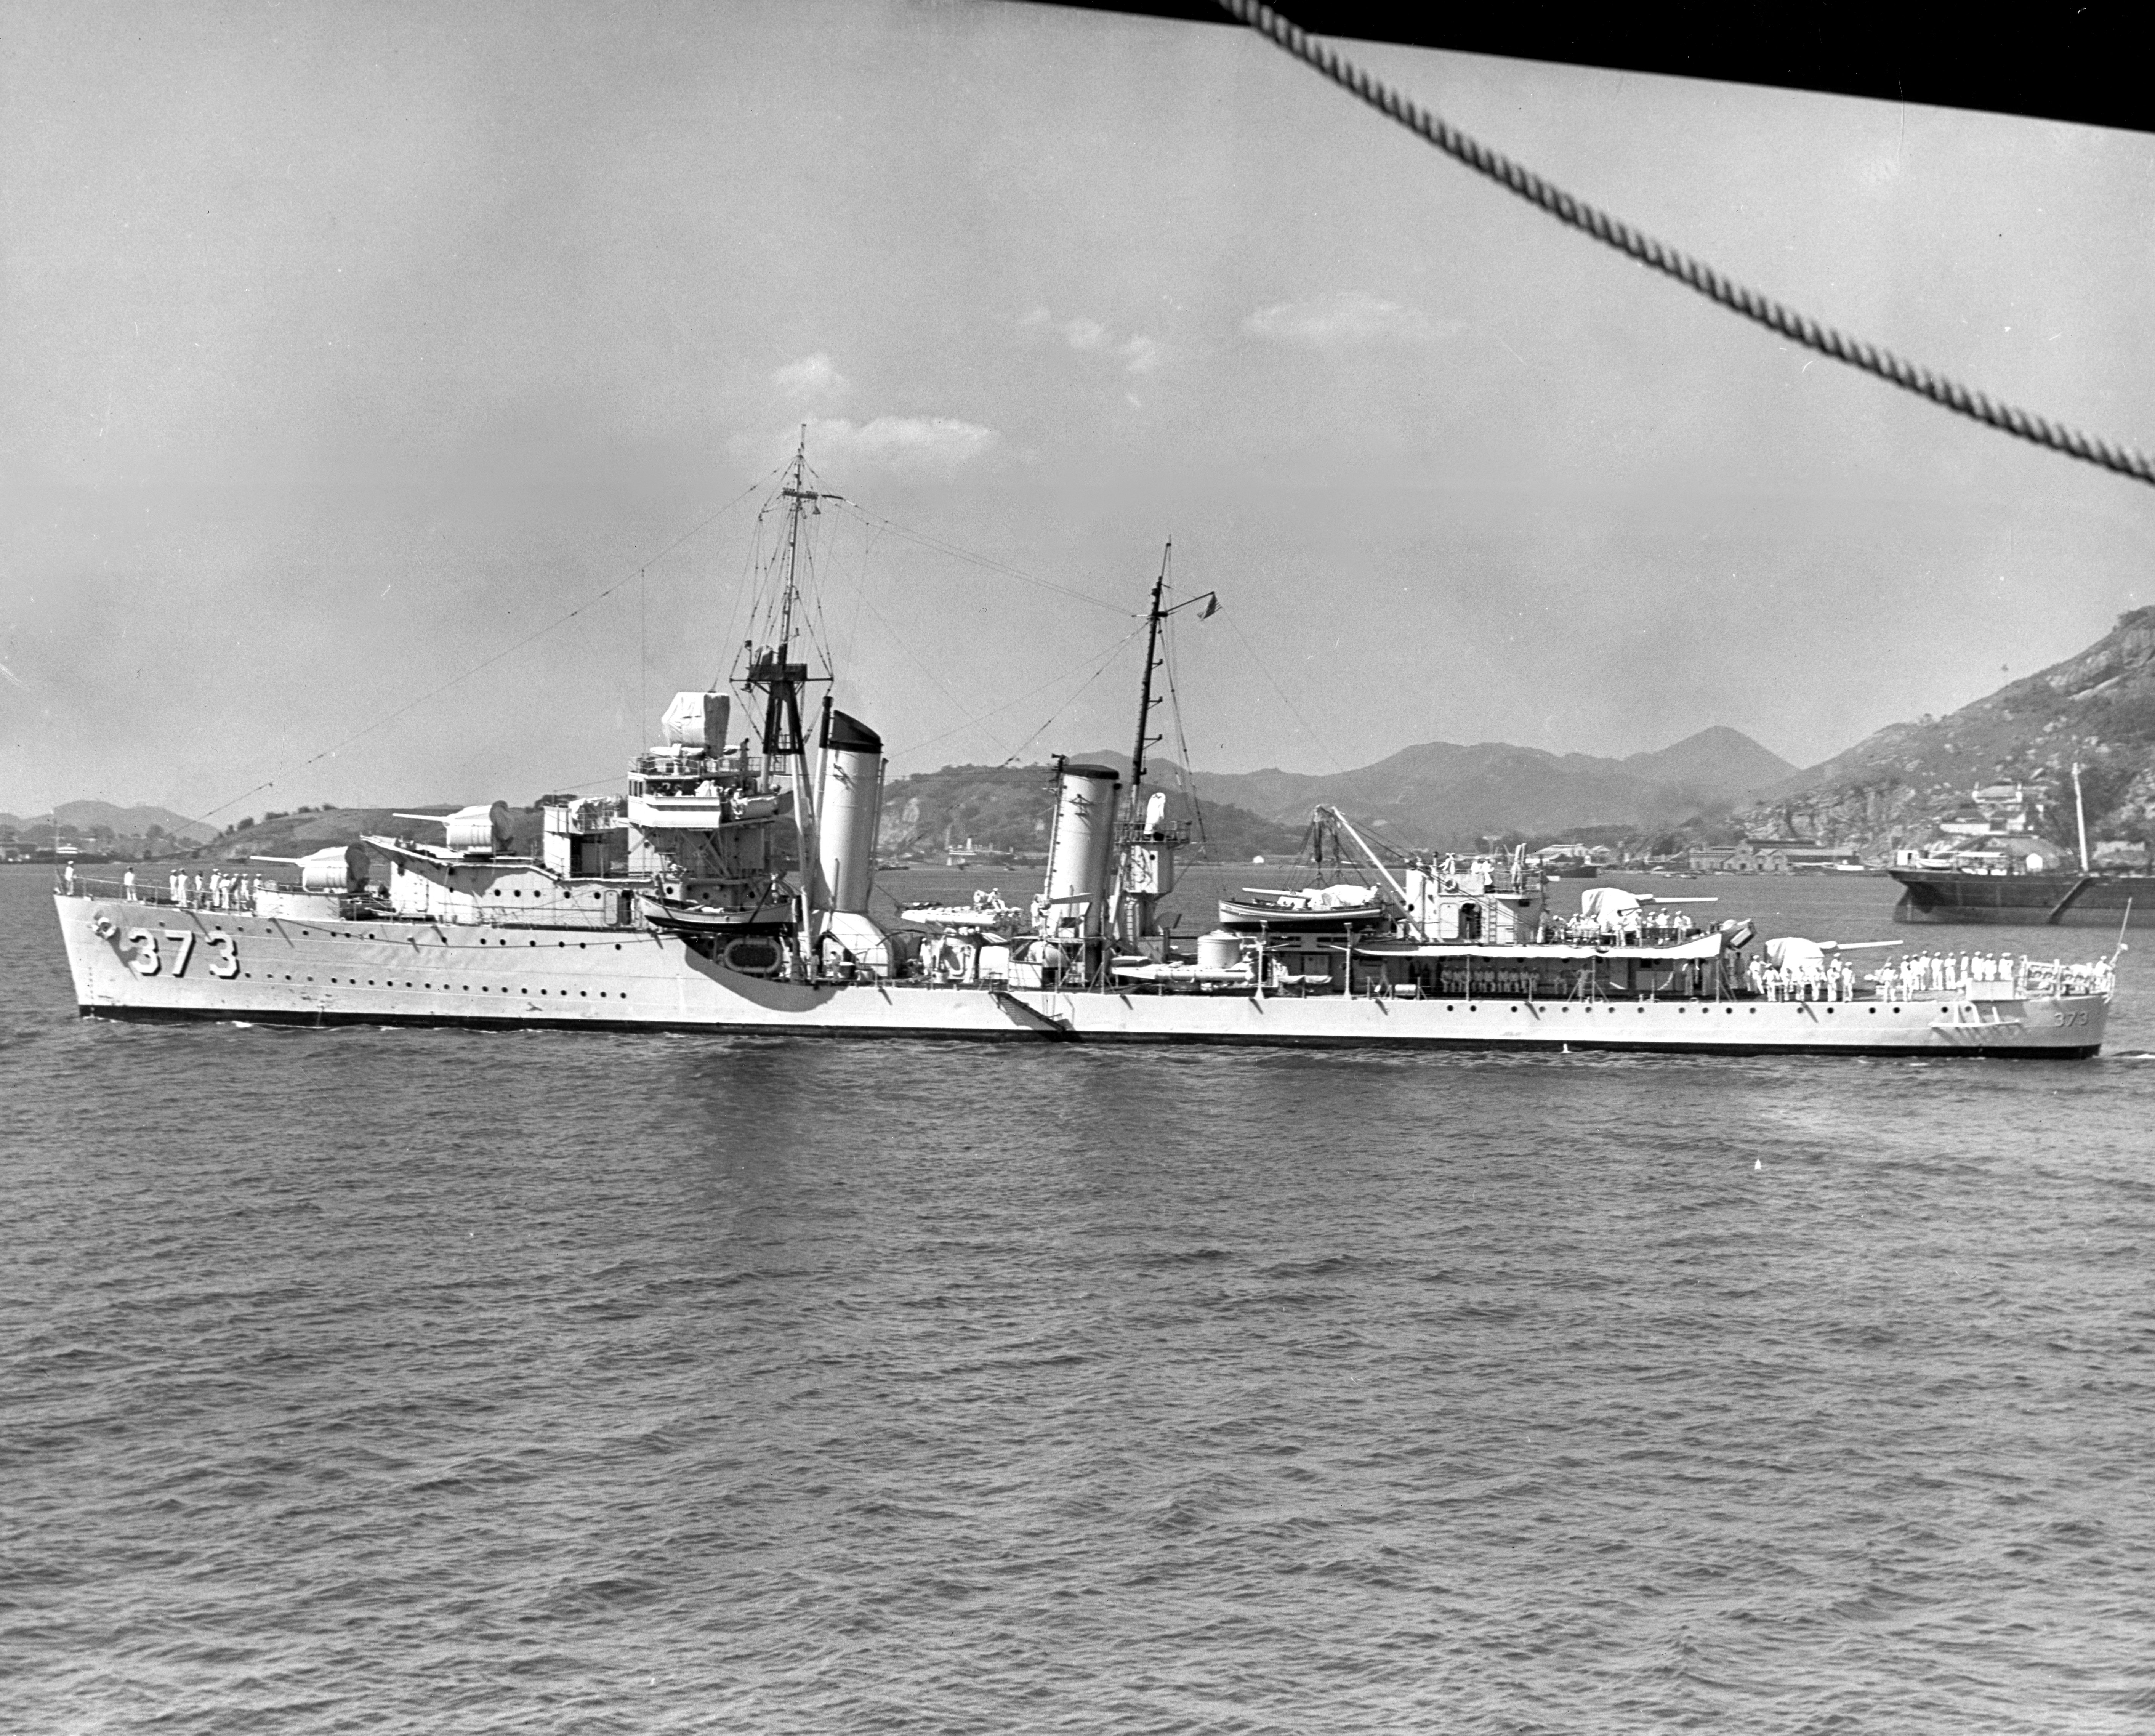 The U.S. Navy destroyer USS Shaw (DD-373) entering Rio de Janeiro harbor, Brazil, 1 September 1938. Taken by a USS Enterprise (CV-6) photographer. Official U.S. Navy Photograph, from the collections of the Naval Historical Center.